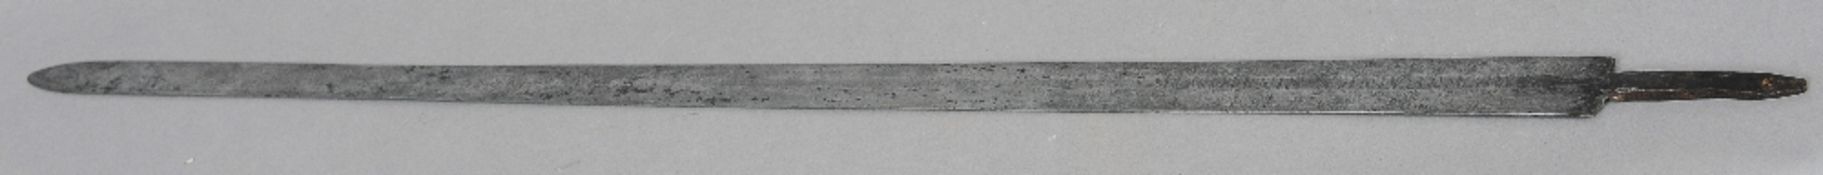 A 17th century broad sword blade
With a Latin inscription translating to "Draw me not without cause,